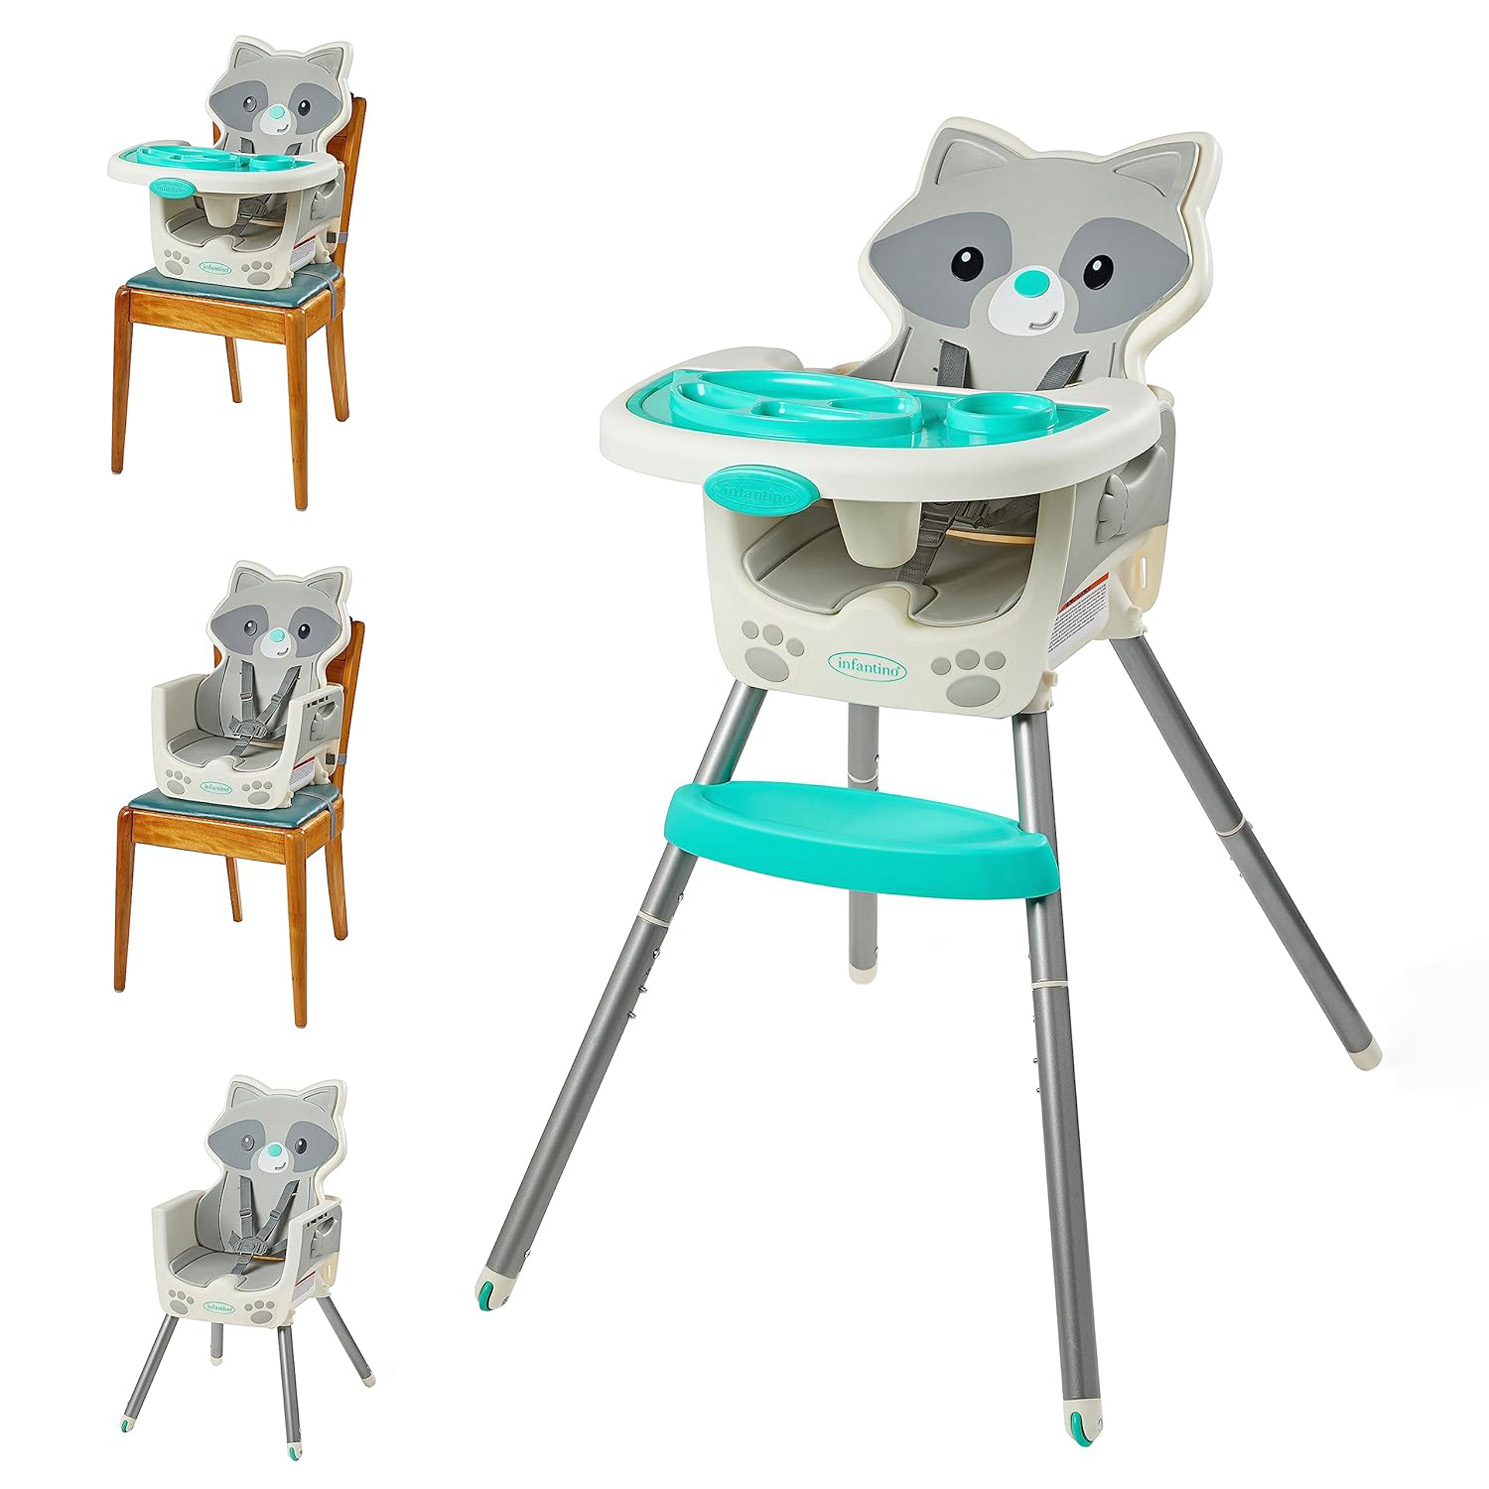 Infantino Grow-with-Me 4-in-1 Convertible High Chair, Raccoon-Theme, Space-Saving Design, Booster and Toddler Chair, for Infants & Toddlers 3M-36M